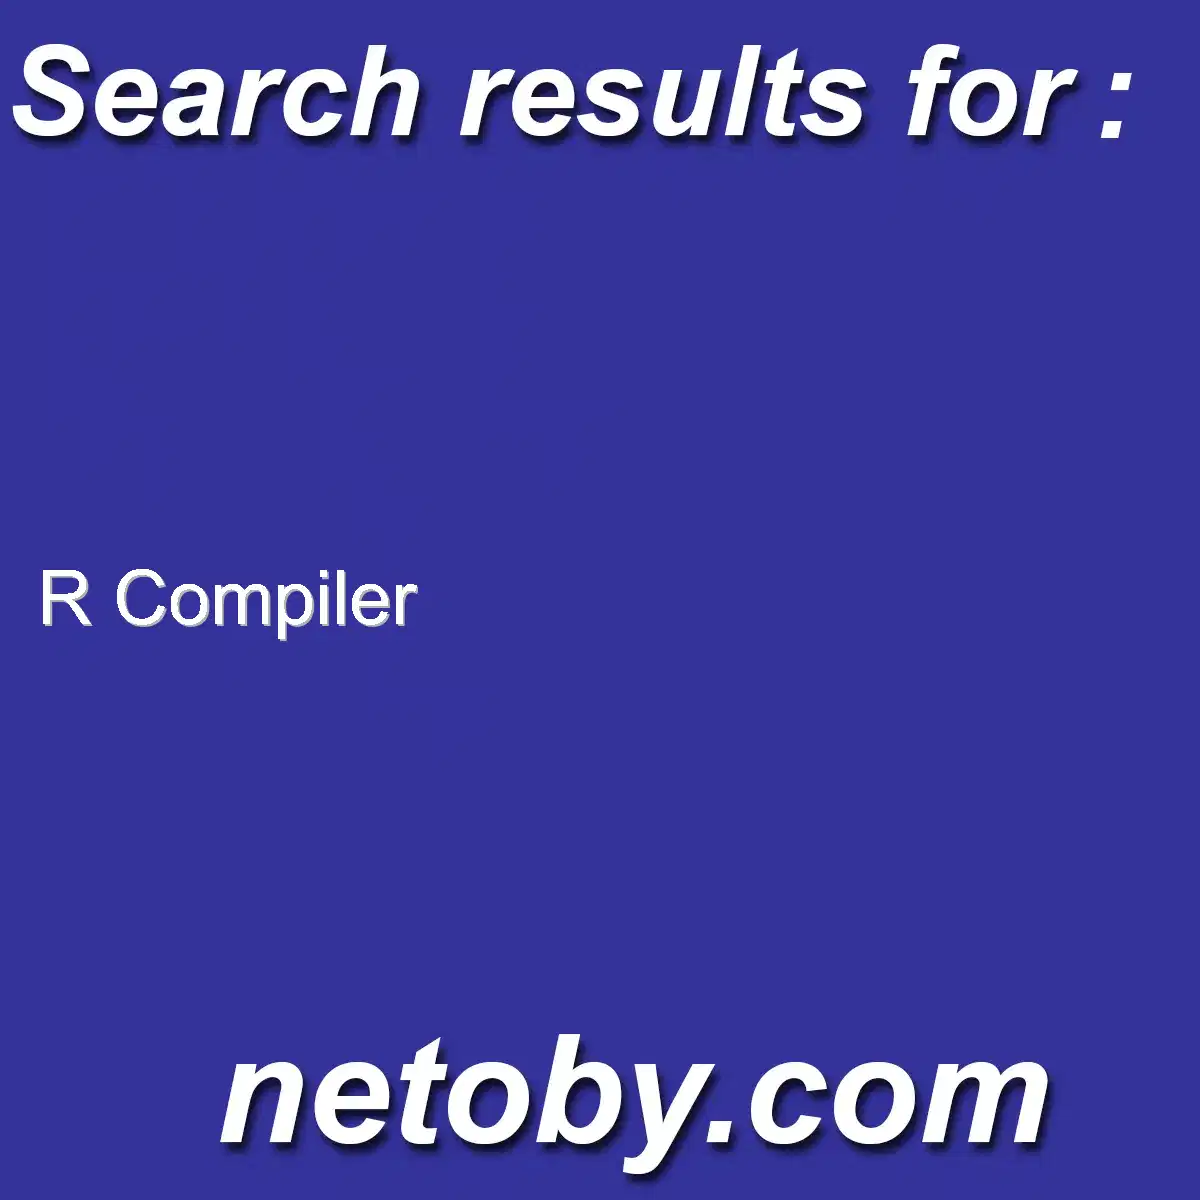 ﻿R Compiler